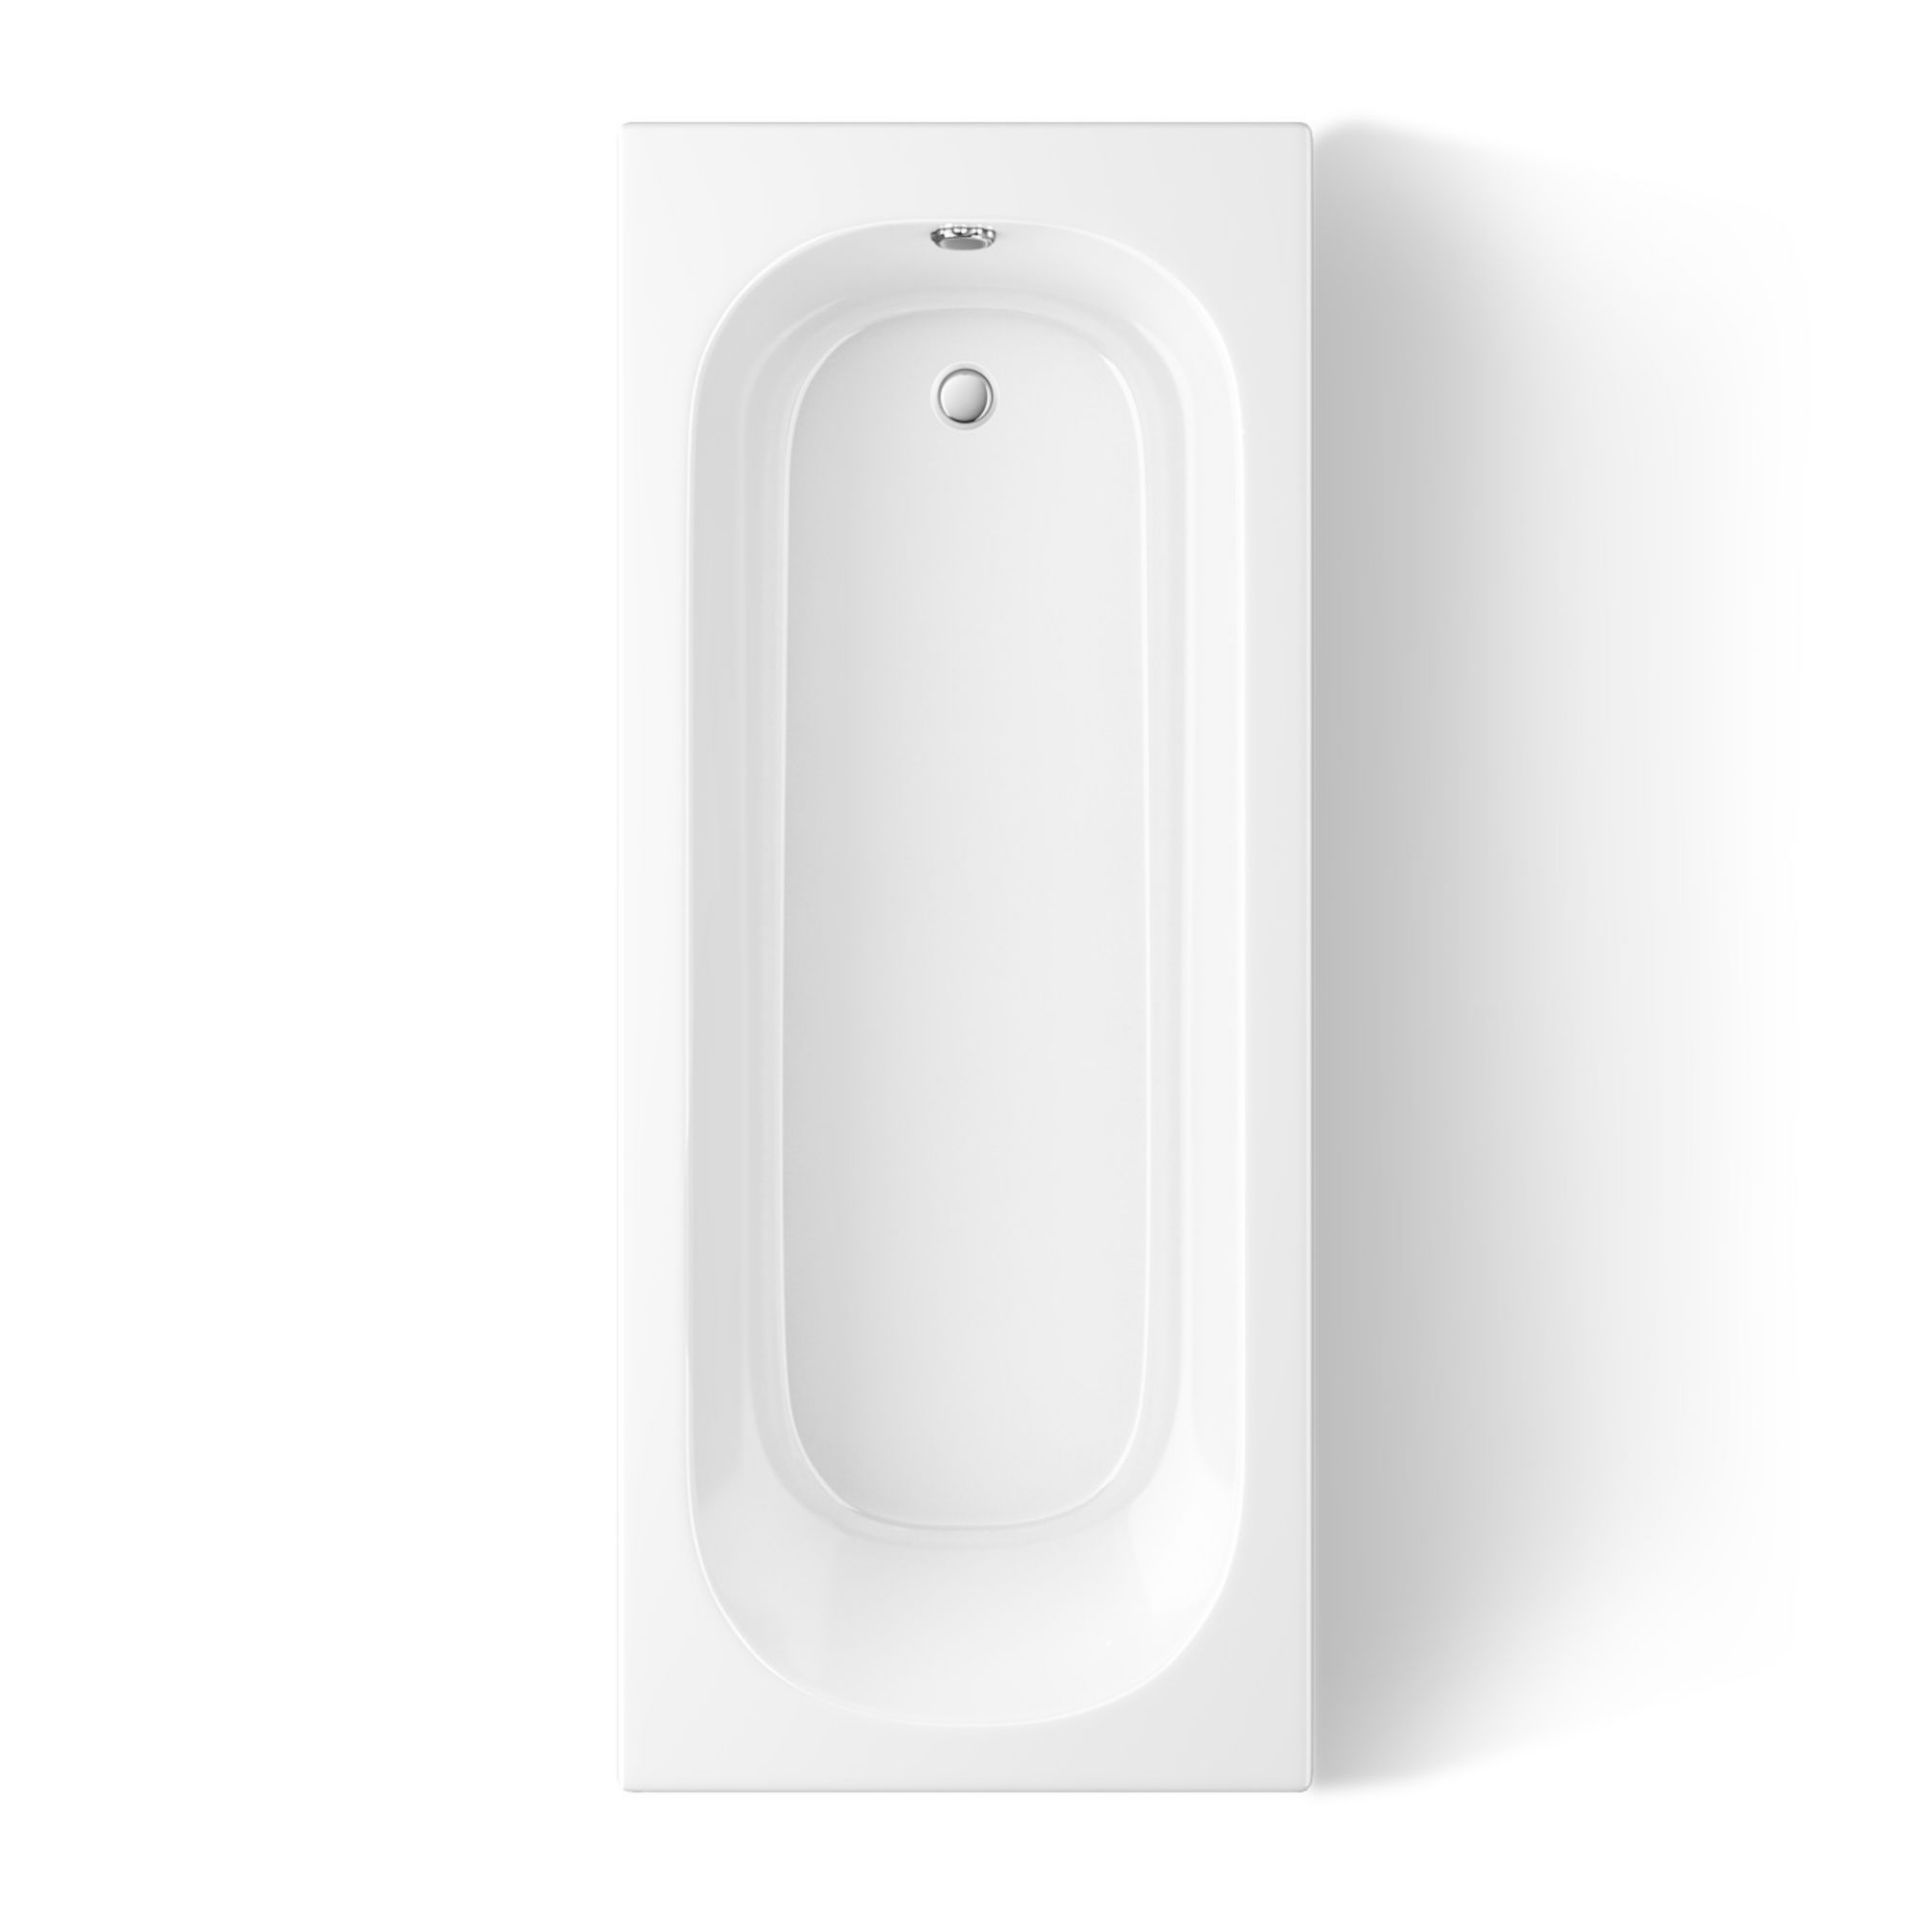 (XX108) ) 1700x700x390mm Round Single Ended Bath with Panel. RRP £299.99. Length: 1700mm Cons... - Image 3 of 3